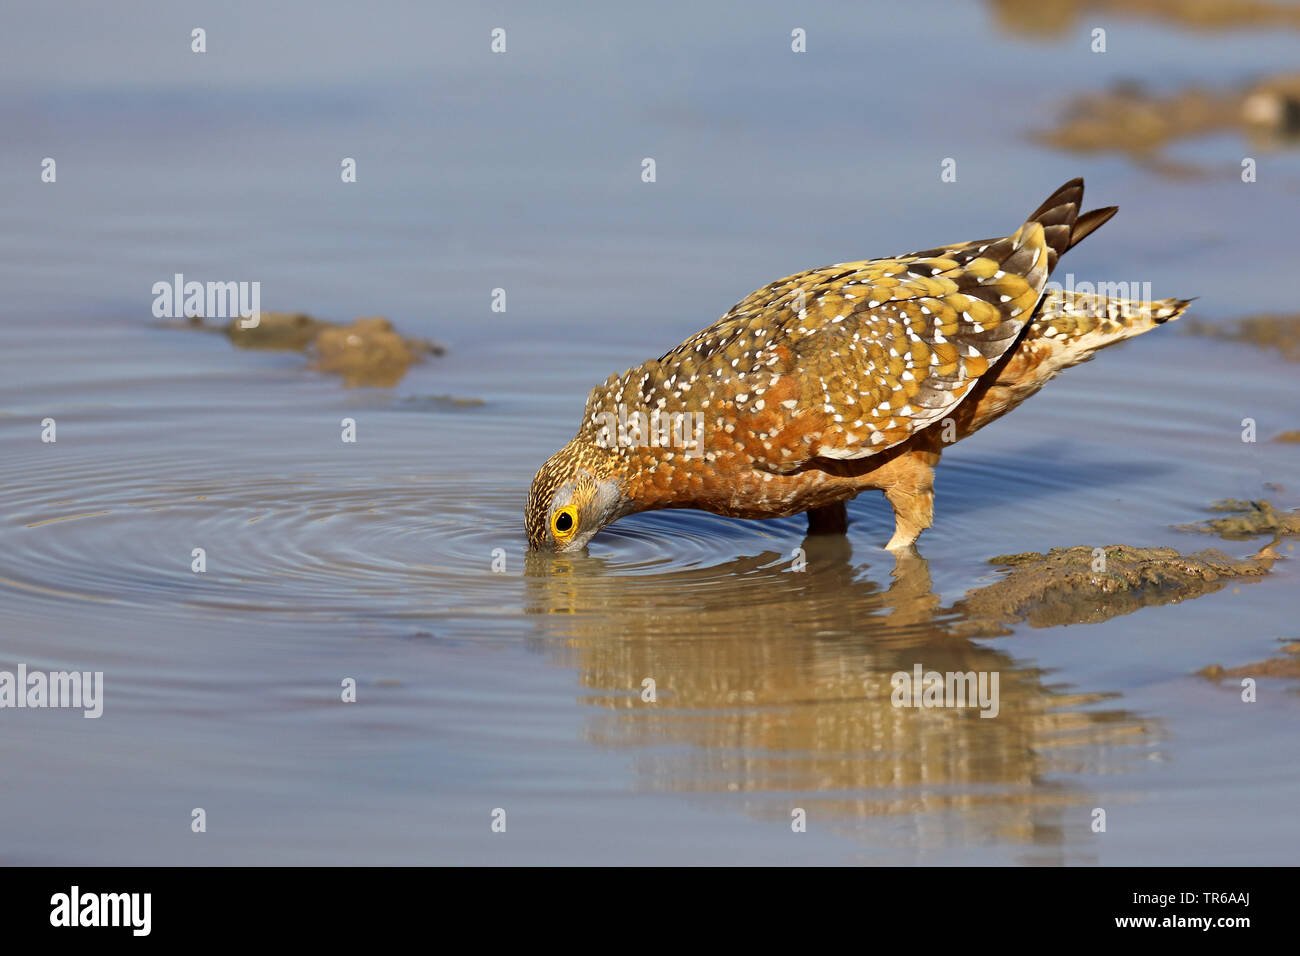 Variegated sandgrouse, Burchell's sandgrouse (Pterocles burchelli), male in water, drinking, South Africa, Kgalagadi Transfrontier National Park Stock Photo